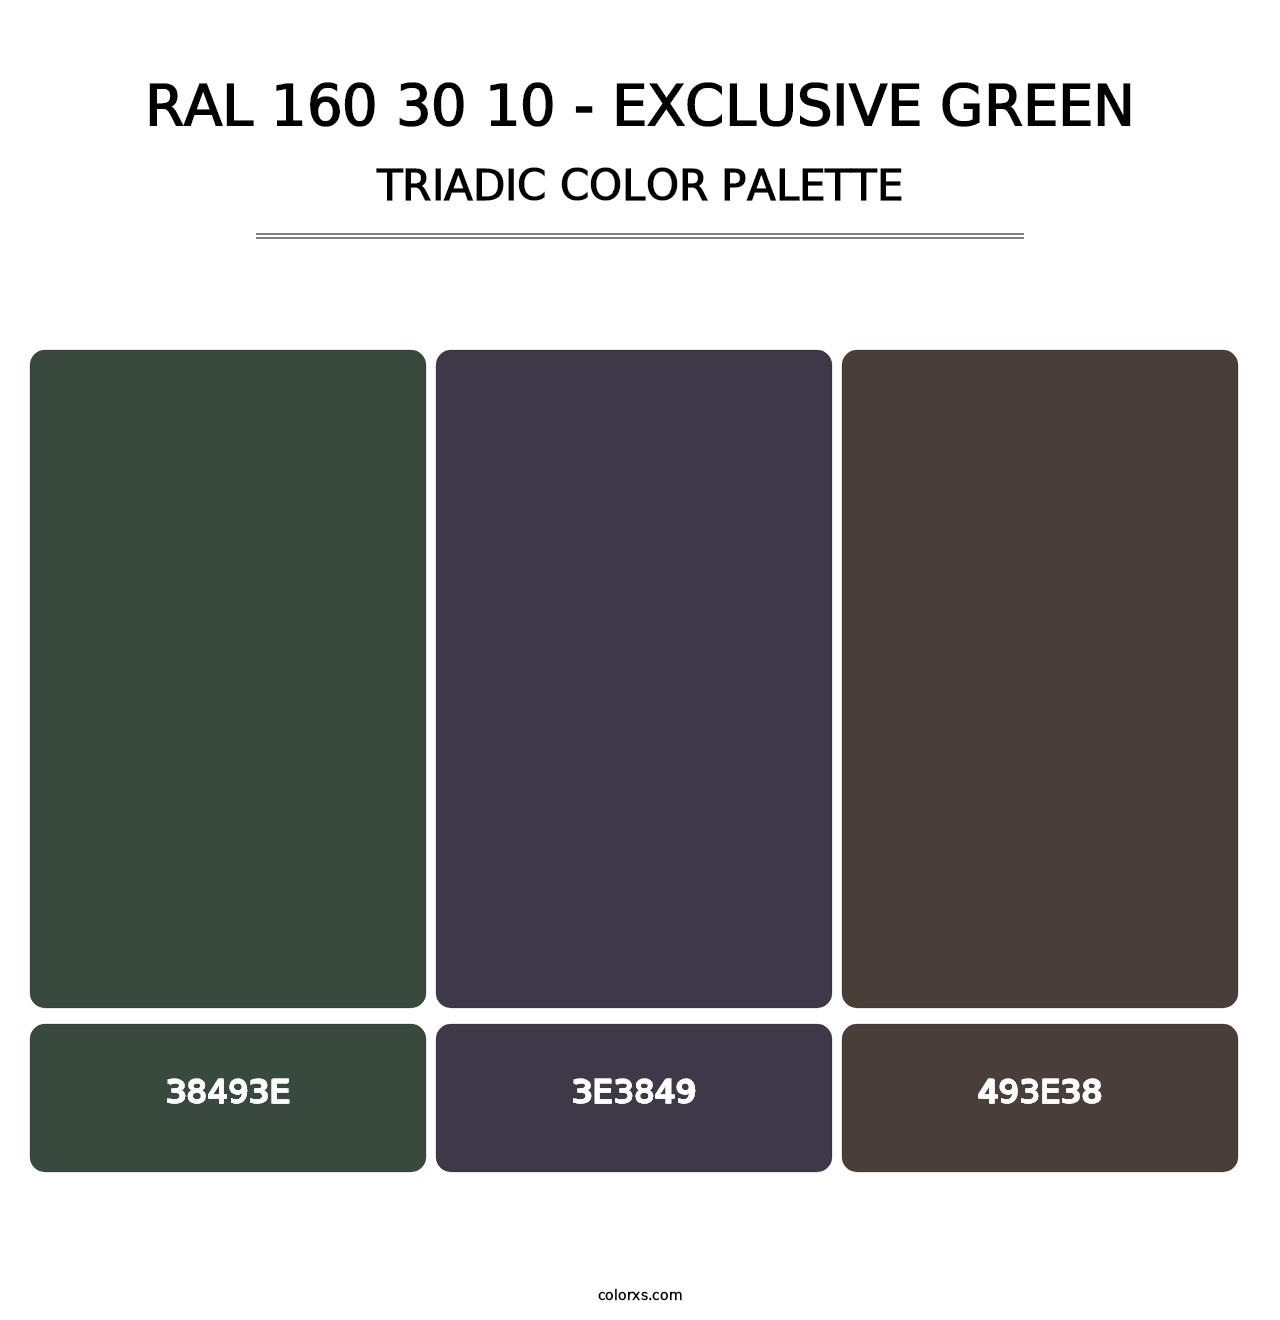 RAL 160 30 10 - Exclusive Green - Triadic Color Palette